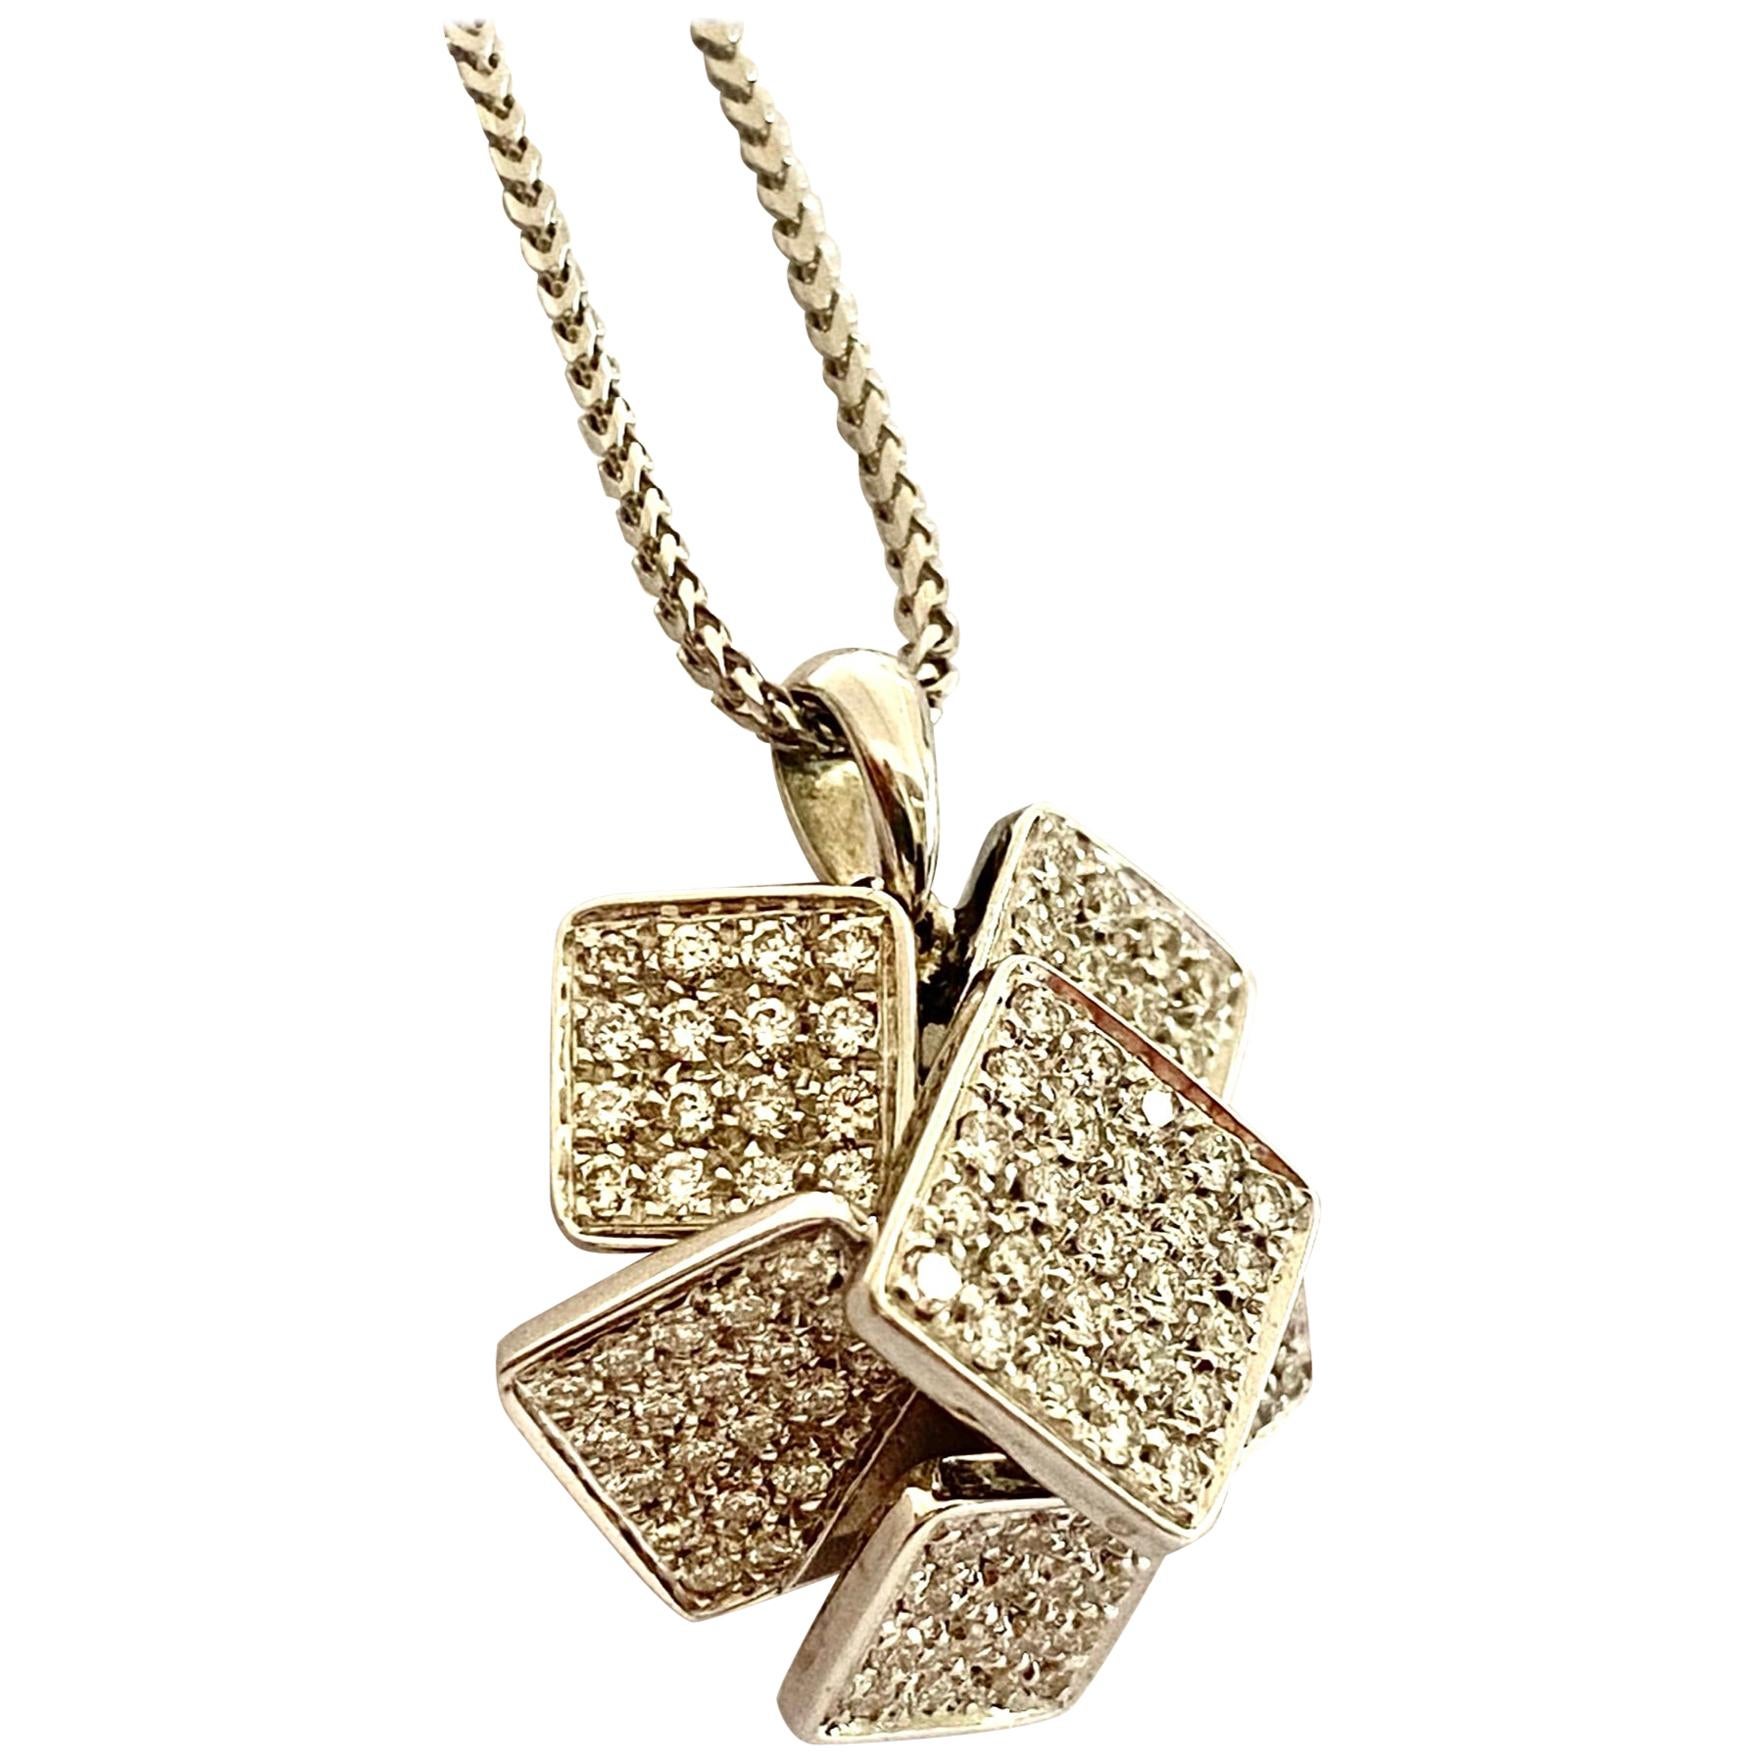 White Gold Pendant Set with 107 Diamonds and a Necklace